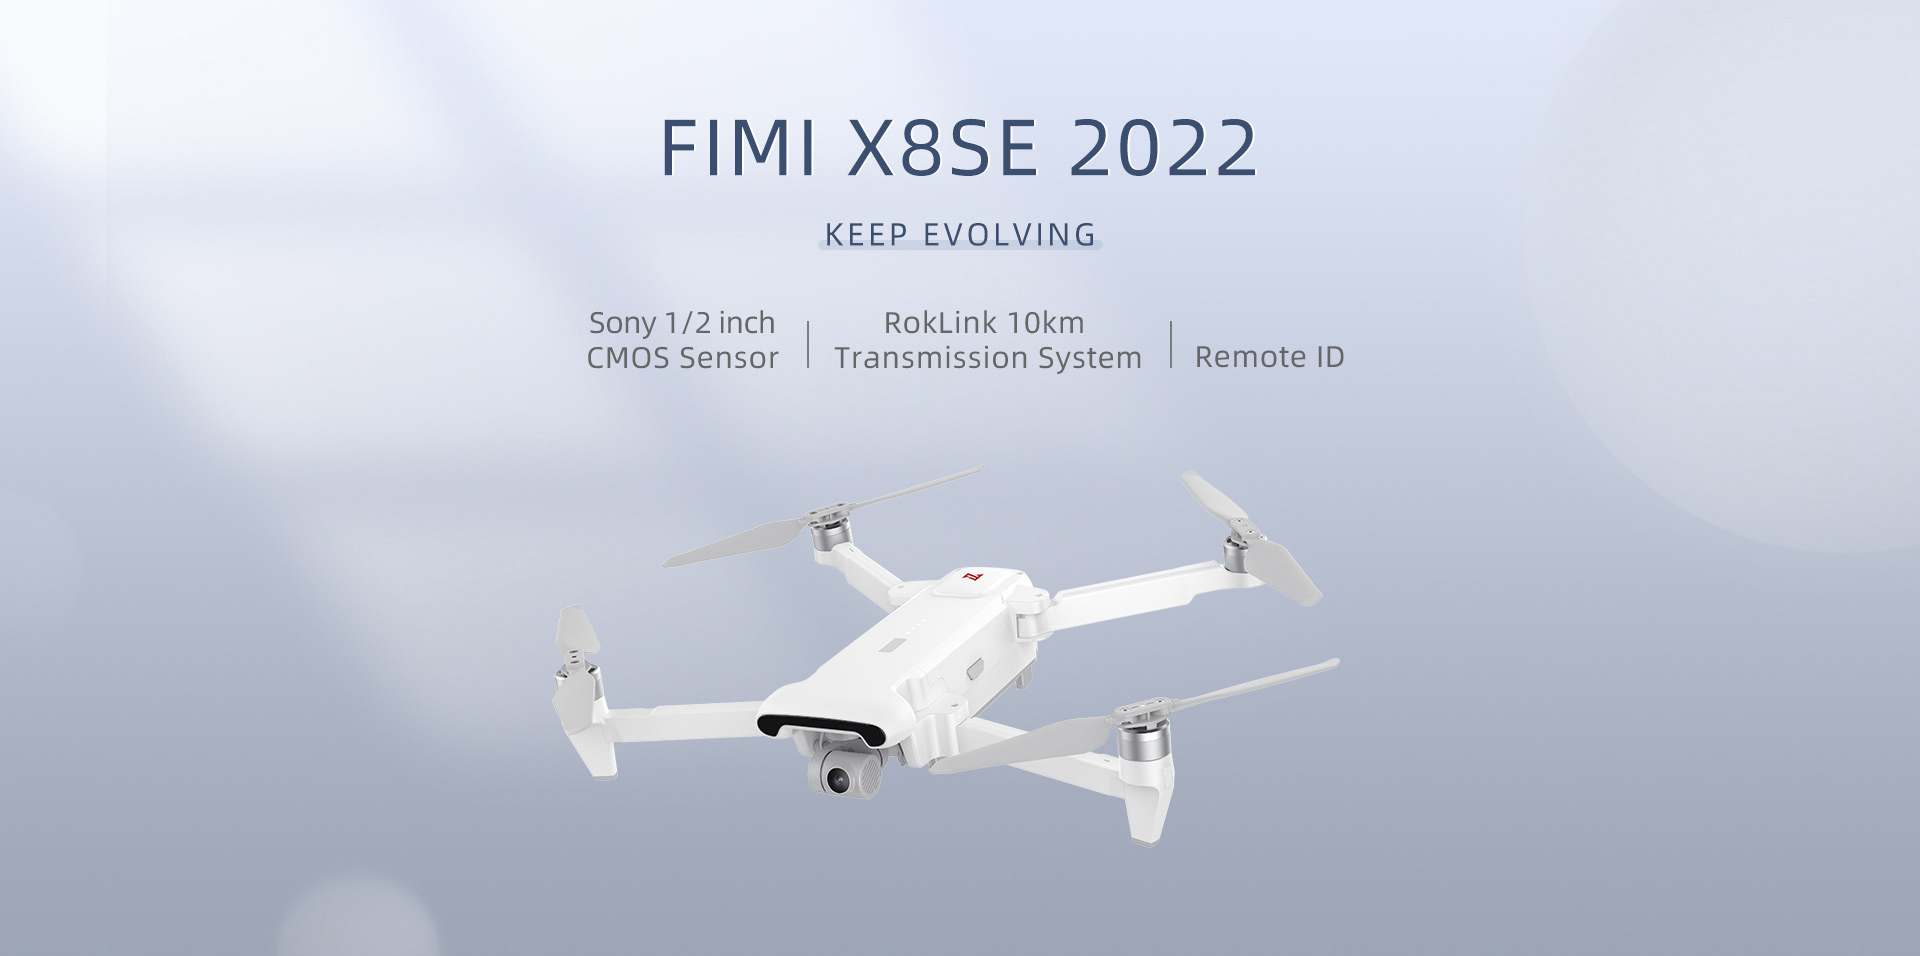 FIMI-X8-SE-2022-24GHz-10KM-FPV-With-3-axis-Gimbal-4K-Camera-HDR-Video-GPS-35mins-Flight-Time-RC-Quad-1895304-2